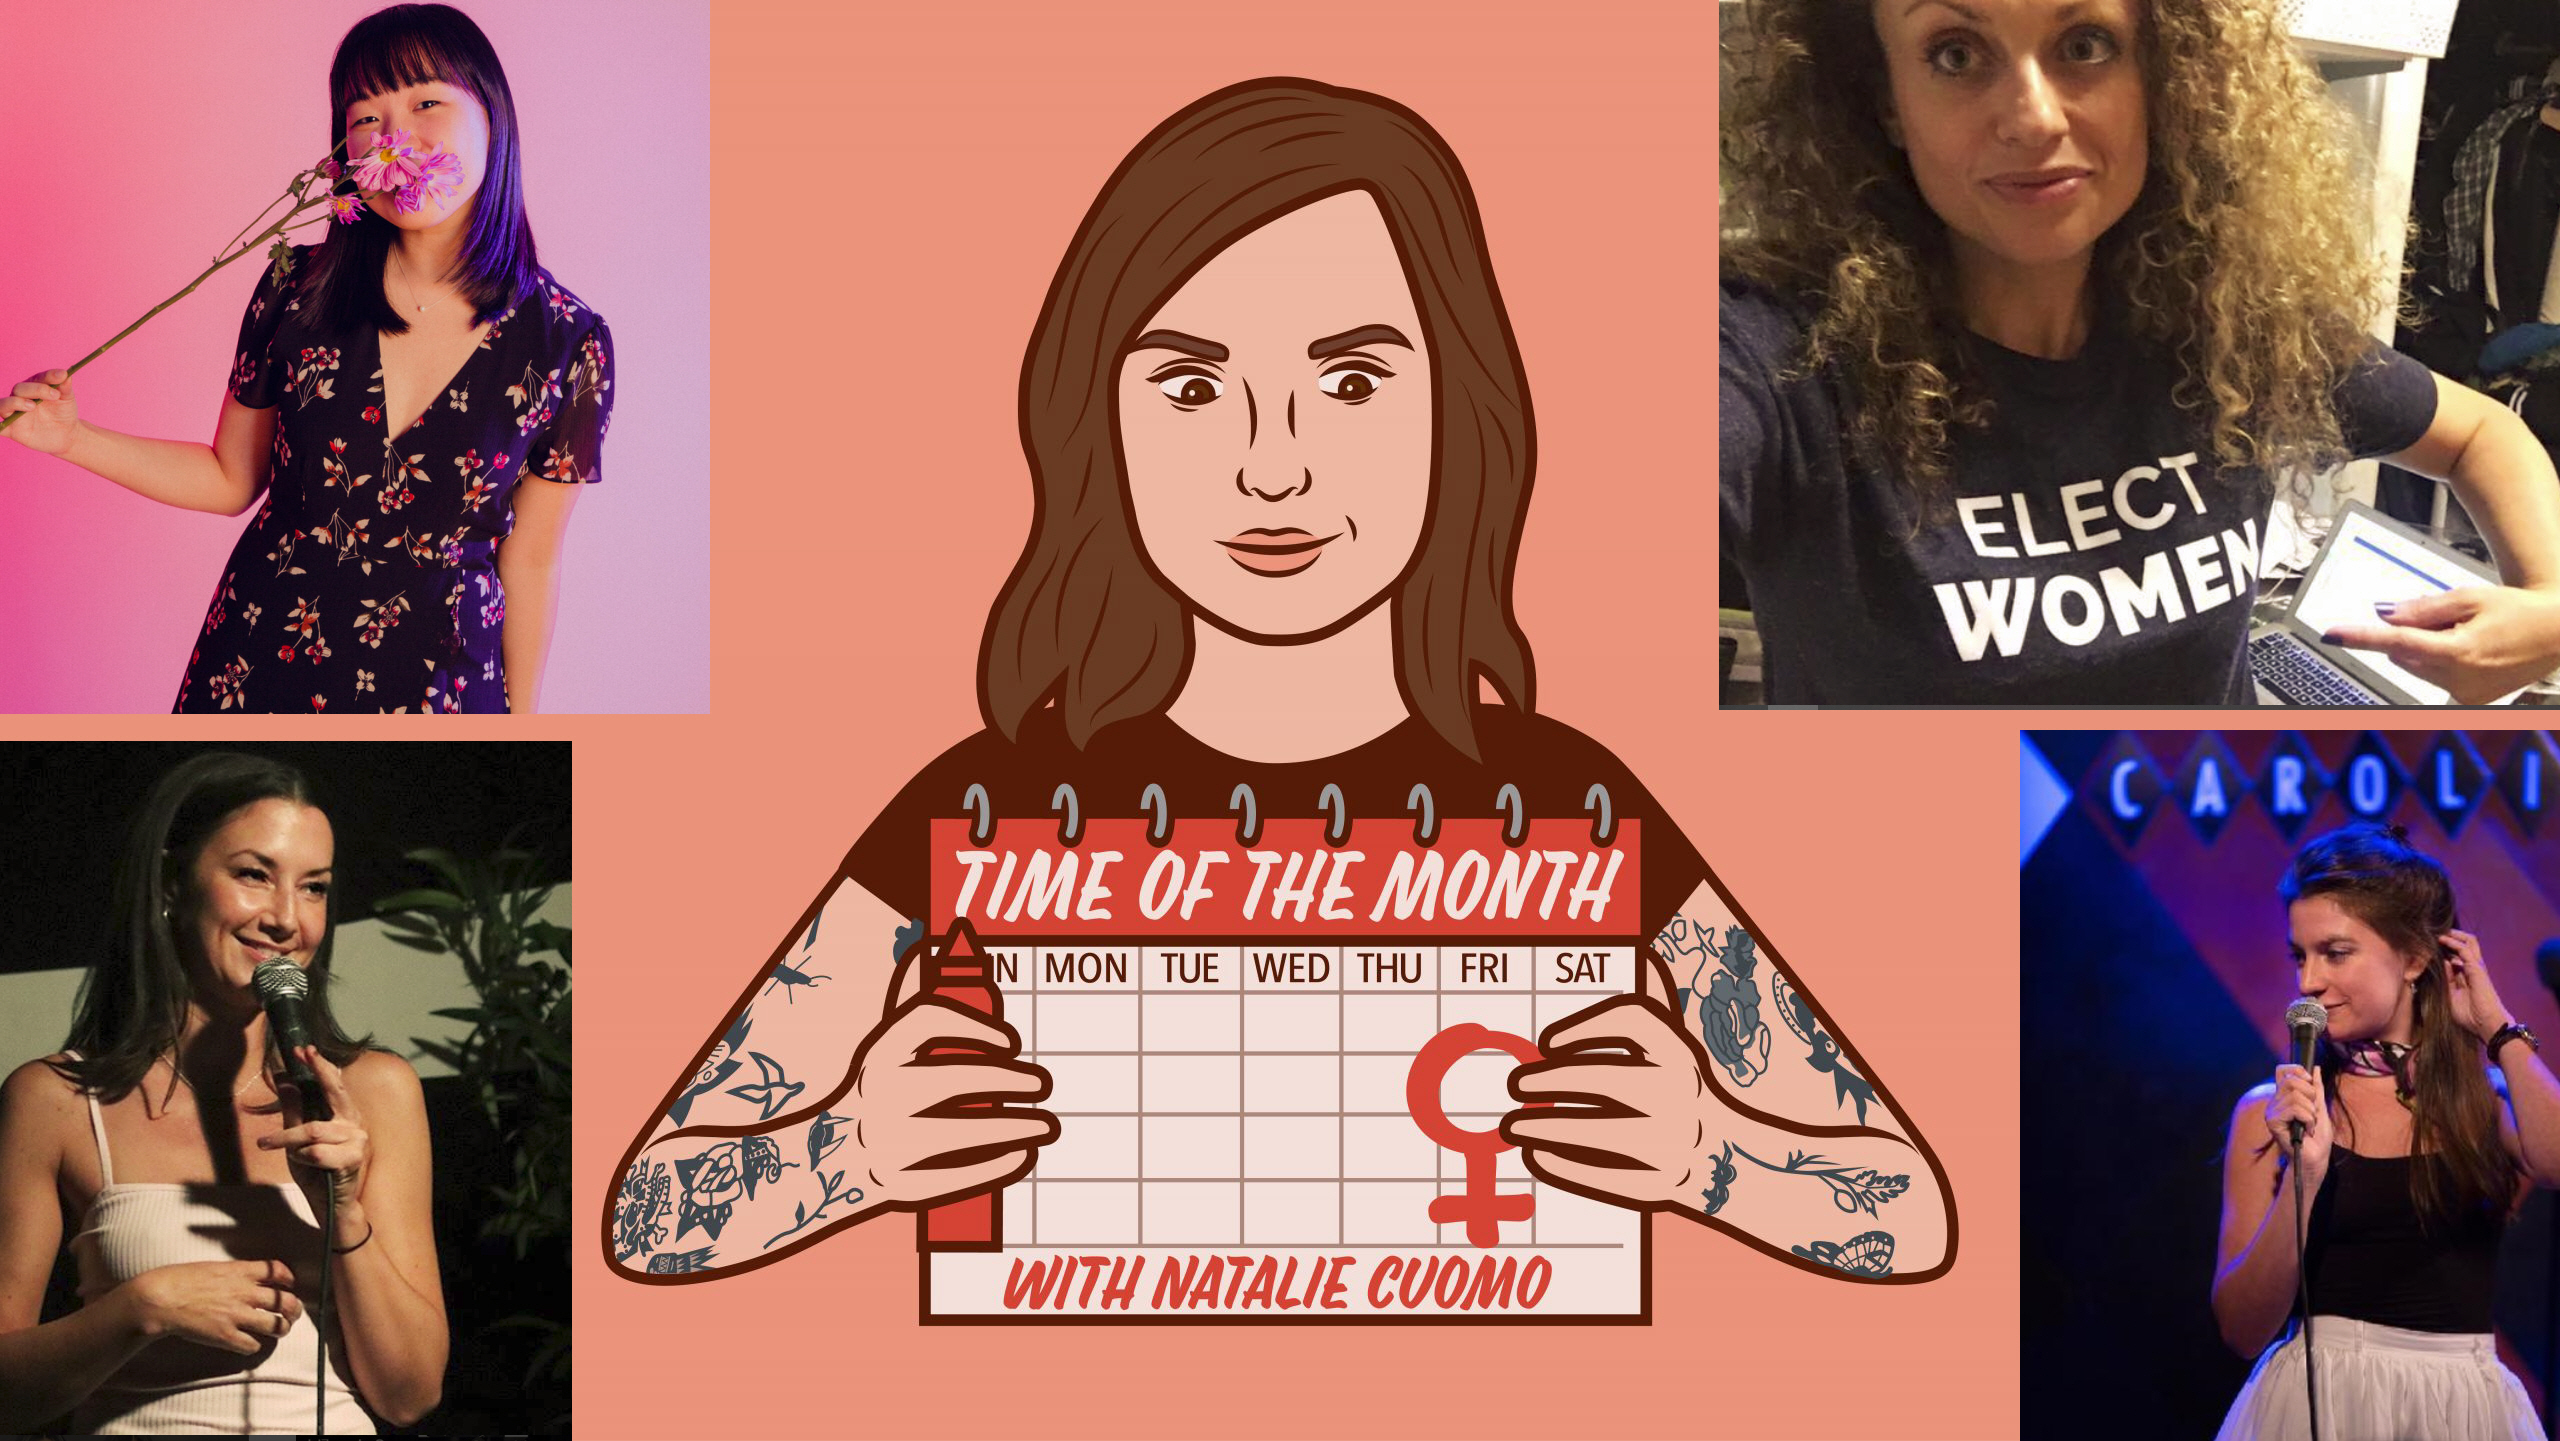 Natalie Cuomo: "That Time of the Month Comedy Show"